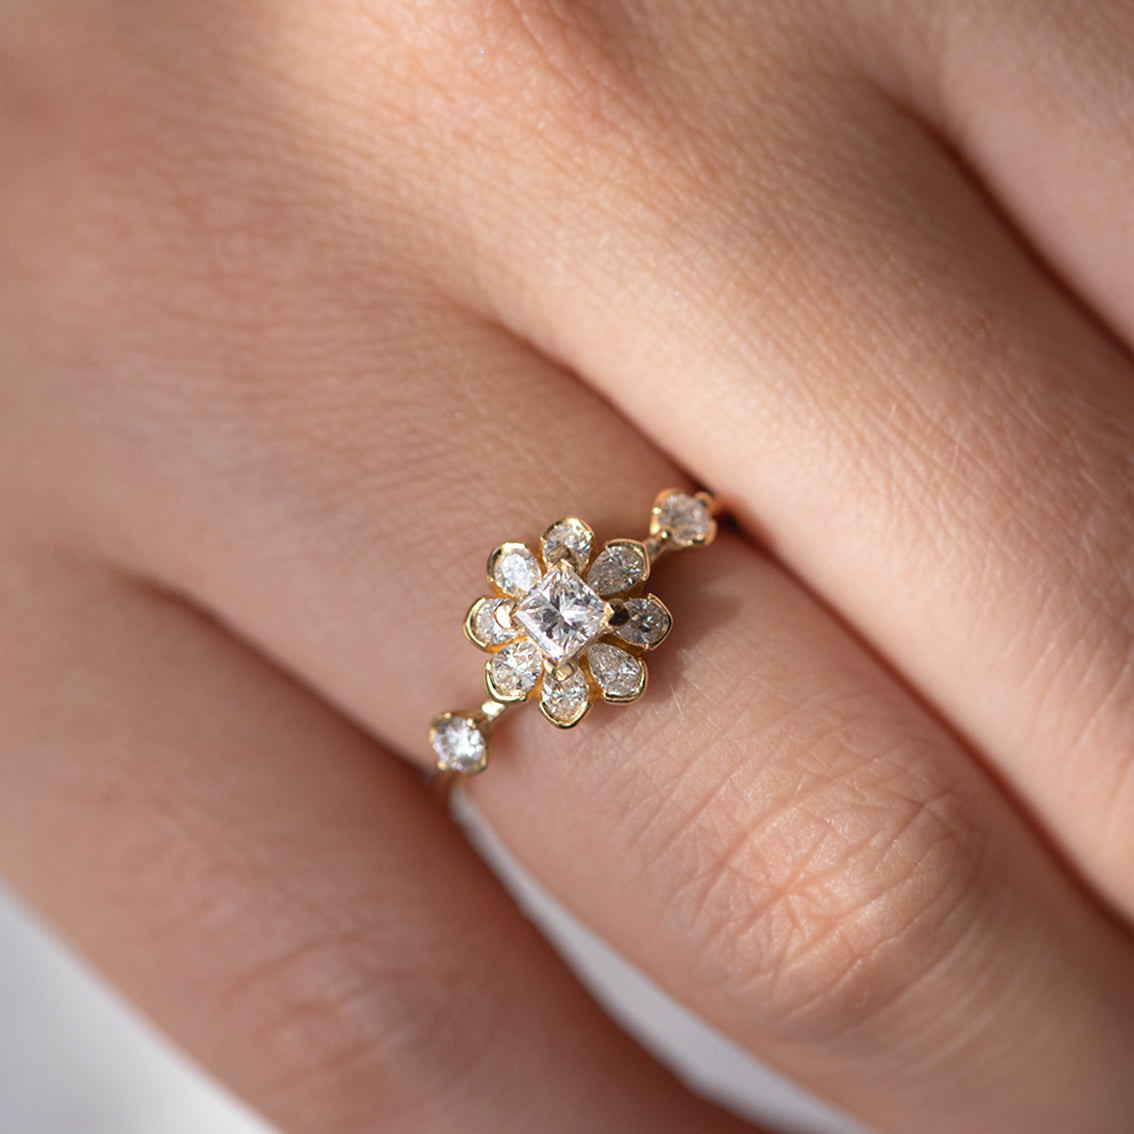 Artemer: Flower Diamond Engagement Ring in 18ct yellow gold, tomfoolery